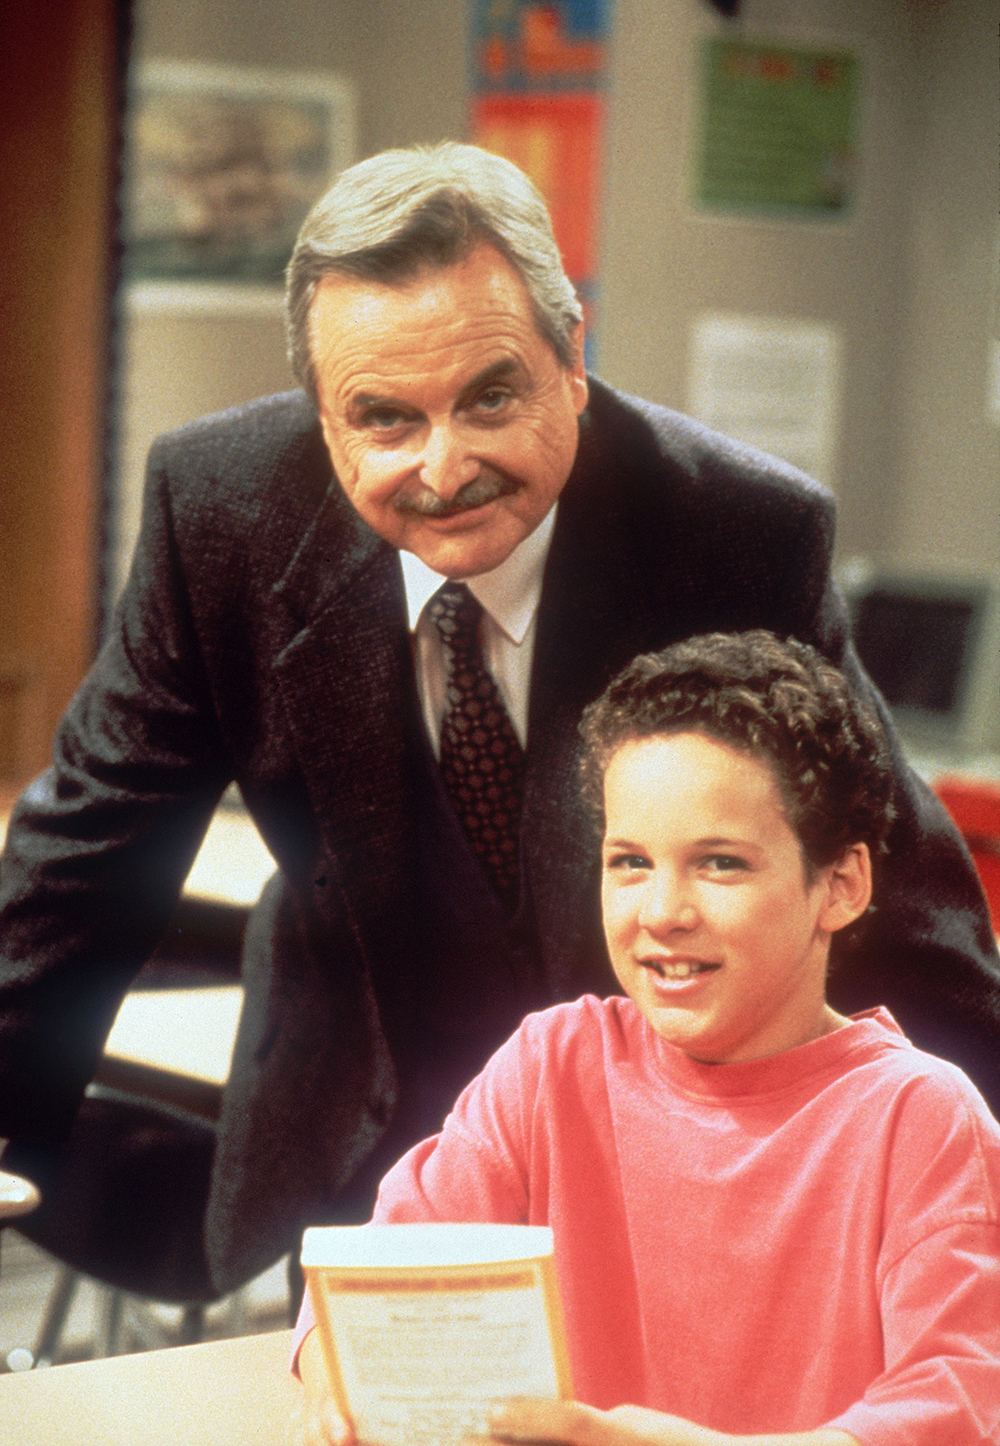 PICS Boy Meets World Pics — The Faces From The Classic Kids Show pic